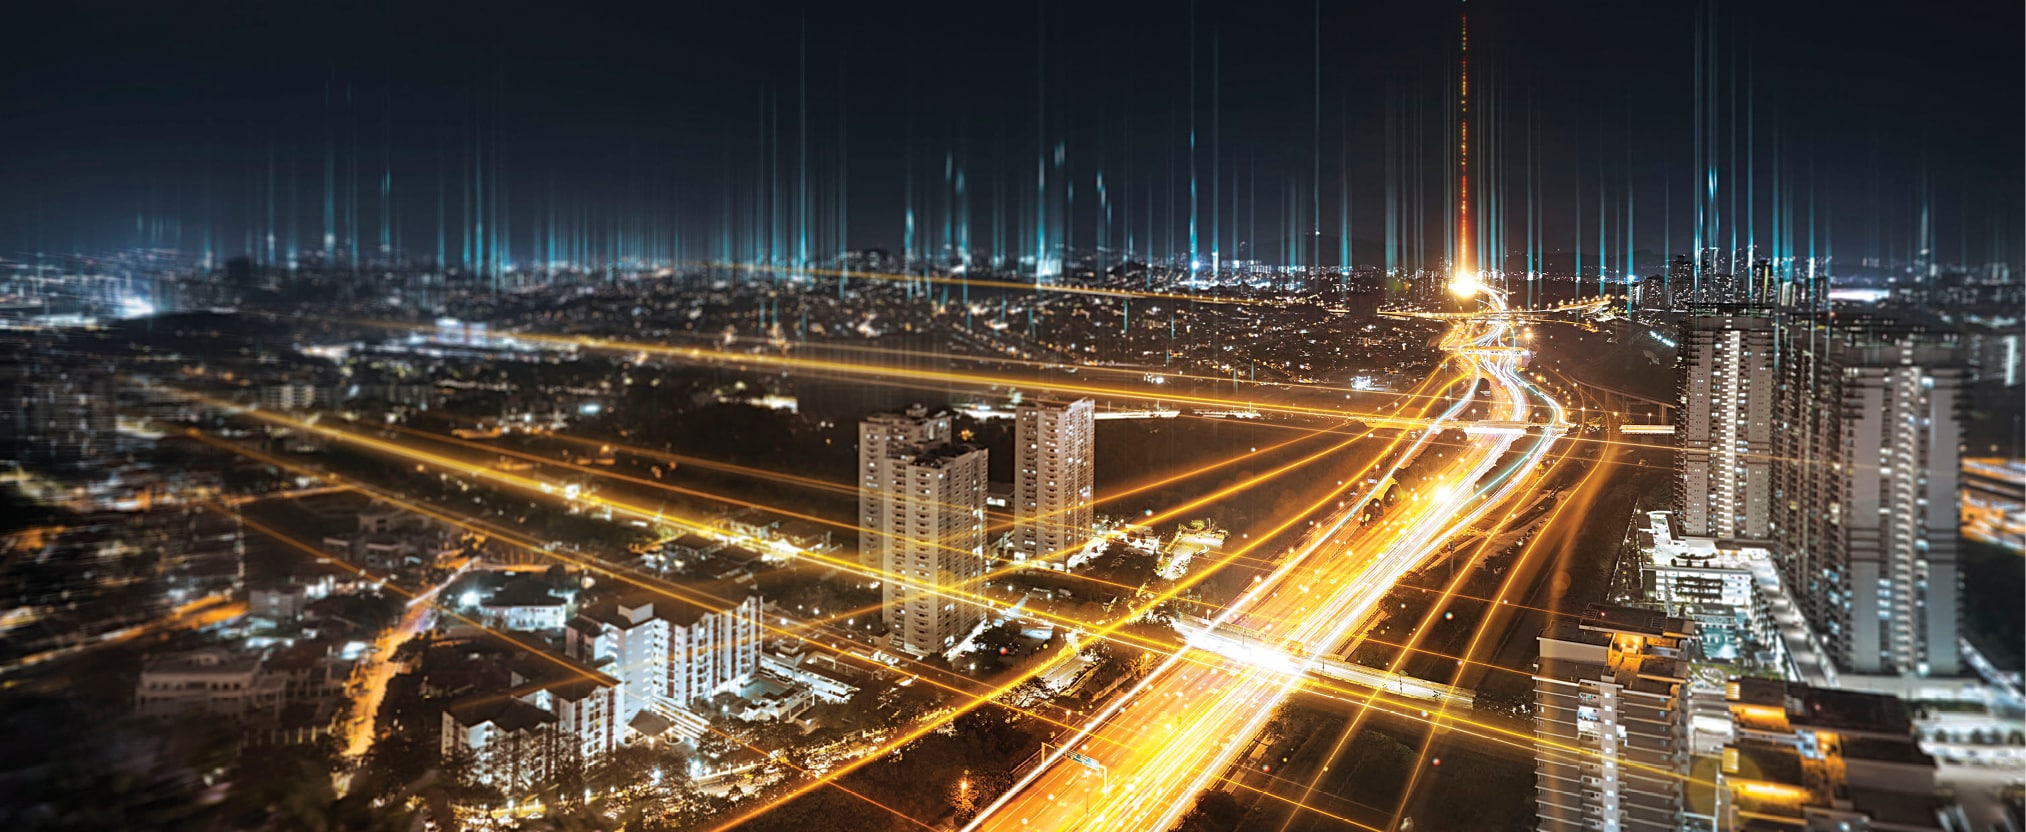 How Intelligent Traffic Management Systems Enable Smarter Use of Transport Networks